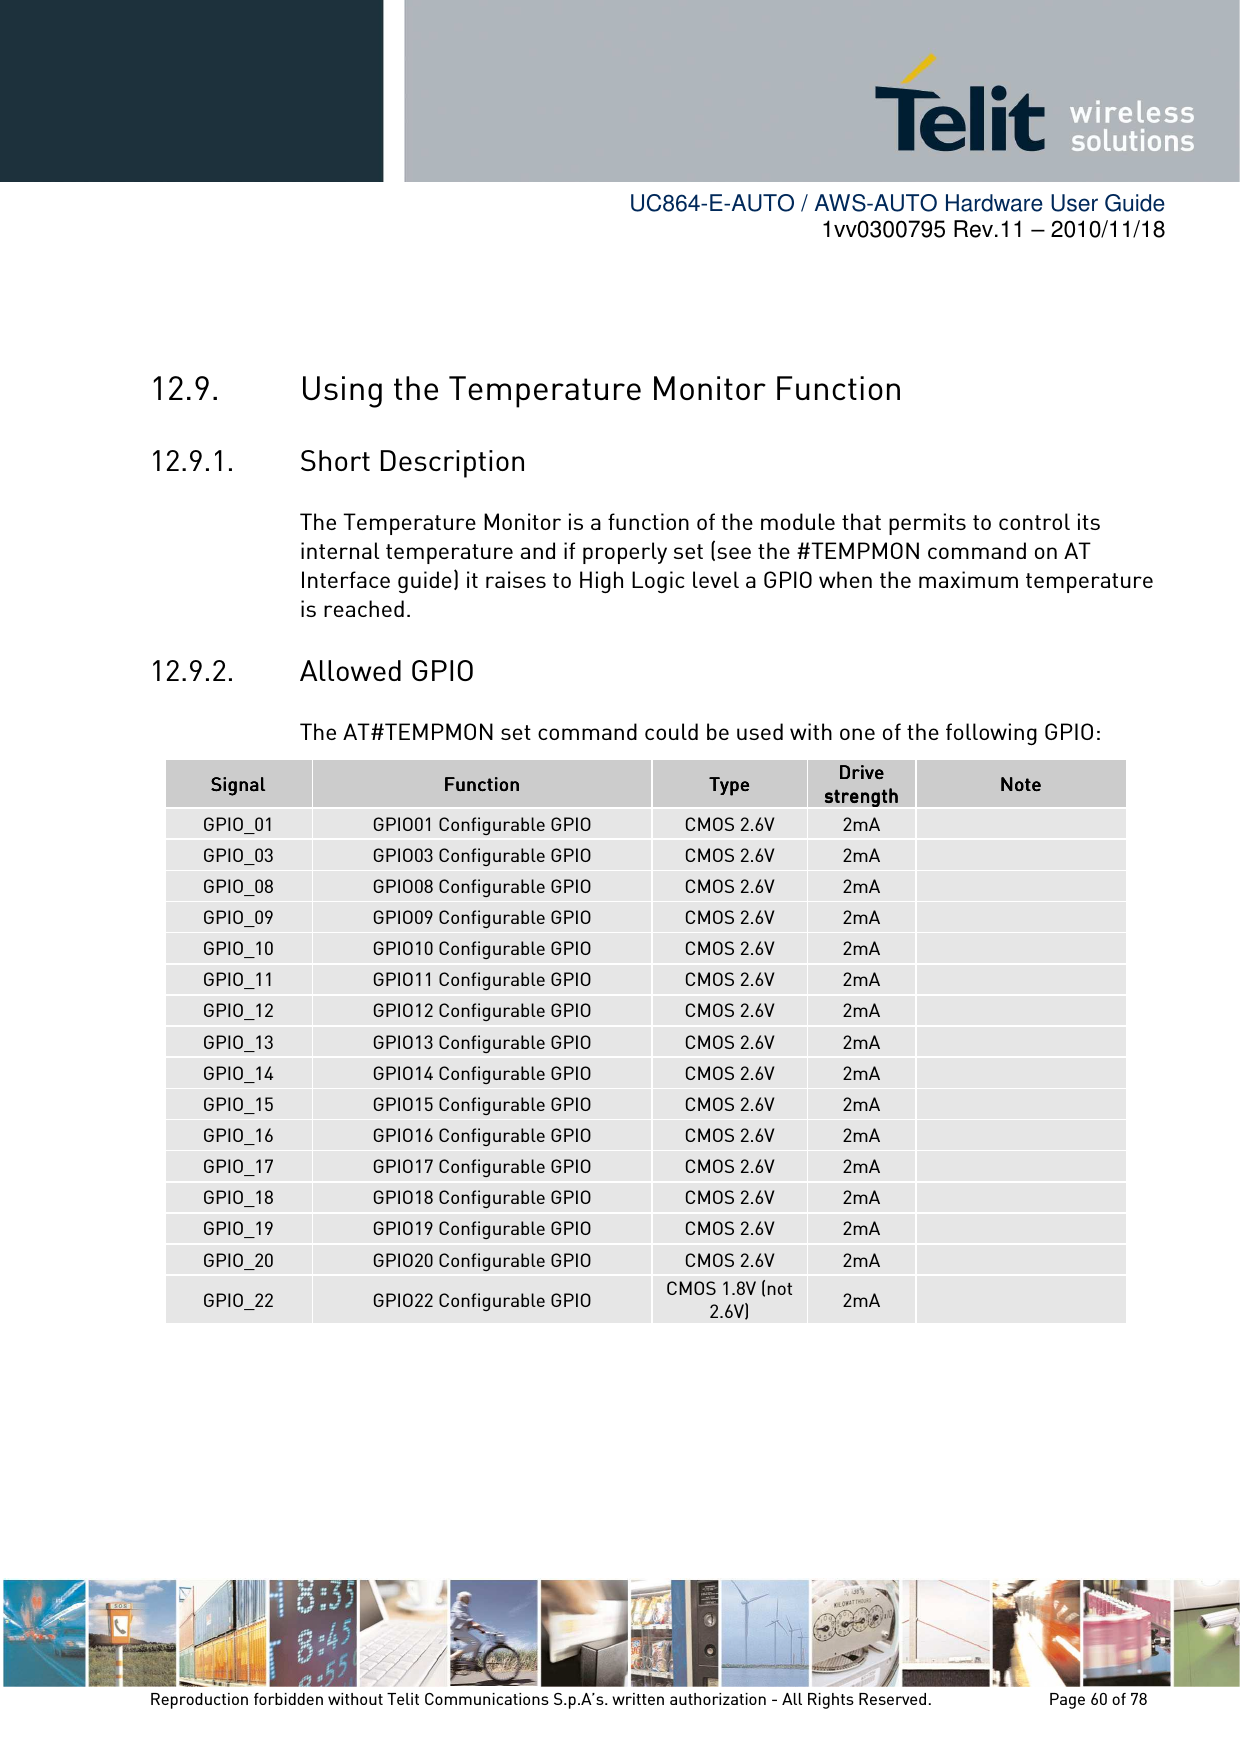        UC864-E-AUTO / AWS-AUTO Hardware User Guide 1vv0300795 Rev.11 – 2010/11/18     Reproduction forbidden without Telit Communications S.p.A’s. written authorization - All Rights Reserved.    Page 60 of 78    12.9. Using the Temperature Monitor Function 12.9.1. Short Description The Temperature Monitor is a function of the module that permits to control its internal temperature and if properly set (see the #TEMPMON command on AT Interface guide) it raises to High Logic level a GPIO when the maximum temperature is reached. 12.9.2. Allowed GPIO The AT#TEMPMON set command could be used with one of the following GPIO: SignalSignalSignalSignal     FunctionFunctionFunctionFunction     TypeTypeTypeType    Drive Drive Drive Drive strengthstrengthstrengthstrength    NoteNoteNoteNote    GPIO_01  GPIO01 Configurable GPIO  CMOS 2.6V  2mA   GPIO_03  GPIO03 Configurable GPIO  CMOS 2.6V  2mA   GPIO_08  GPIO08 Configurable GPIO  CMOS 2.6V  2mA   GPIO_09  GPIO09 Configurable GPIO  CMOS 2.6V  2mA   GPIO_10  GPIO10 Configurable GPIO  CMOS 2.6V  2mA   GPIO_11  GPIO11 Configurable GPIO  CMOS 2.6V  2mA   GPIO_12  GPIO12 Configurable GPIO  CMOS 2.6V  2mA   GPIO_13  GPIO13 Configurable GPIO  CMOS 2.6V  2mA   GPIO_14  GPIO14 Configurable GPIO  CMOS 2.6V  2mA   GPIO_15  GPIO15 Configurable GPIO  CMOS 2.6V  2mA   GPIO_16  GPIO16 Configurable GPIO  CMOS 2.6V  2mA   GPIO_17  GPIO17 Configurable GPIO  CMOS 2.6V  2mA   GPIO_18  GPIO18 Configurable GPIO  CMOS 2.6V  2mA   GPIO_19  GPIO19 Configurable GPIO  CMOS 2.6V  2mA   GPIO_20  GPIO20 Configurable GPIO  CMOS 2.6V  2mA   GPIO_22  GPIO22 Configurable GPIO  CMOS 1.8V (not 2.6V)  2mA    